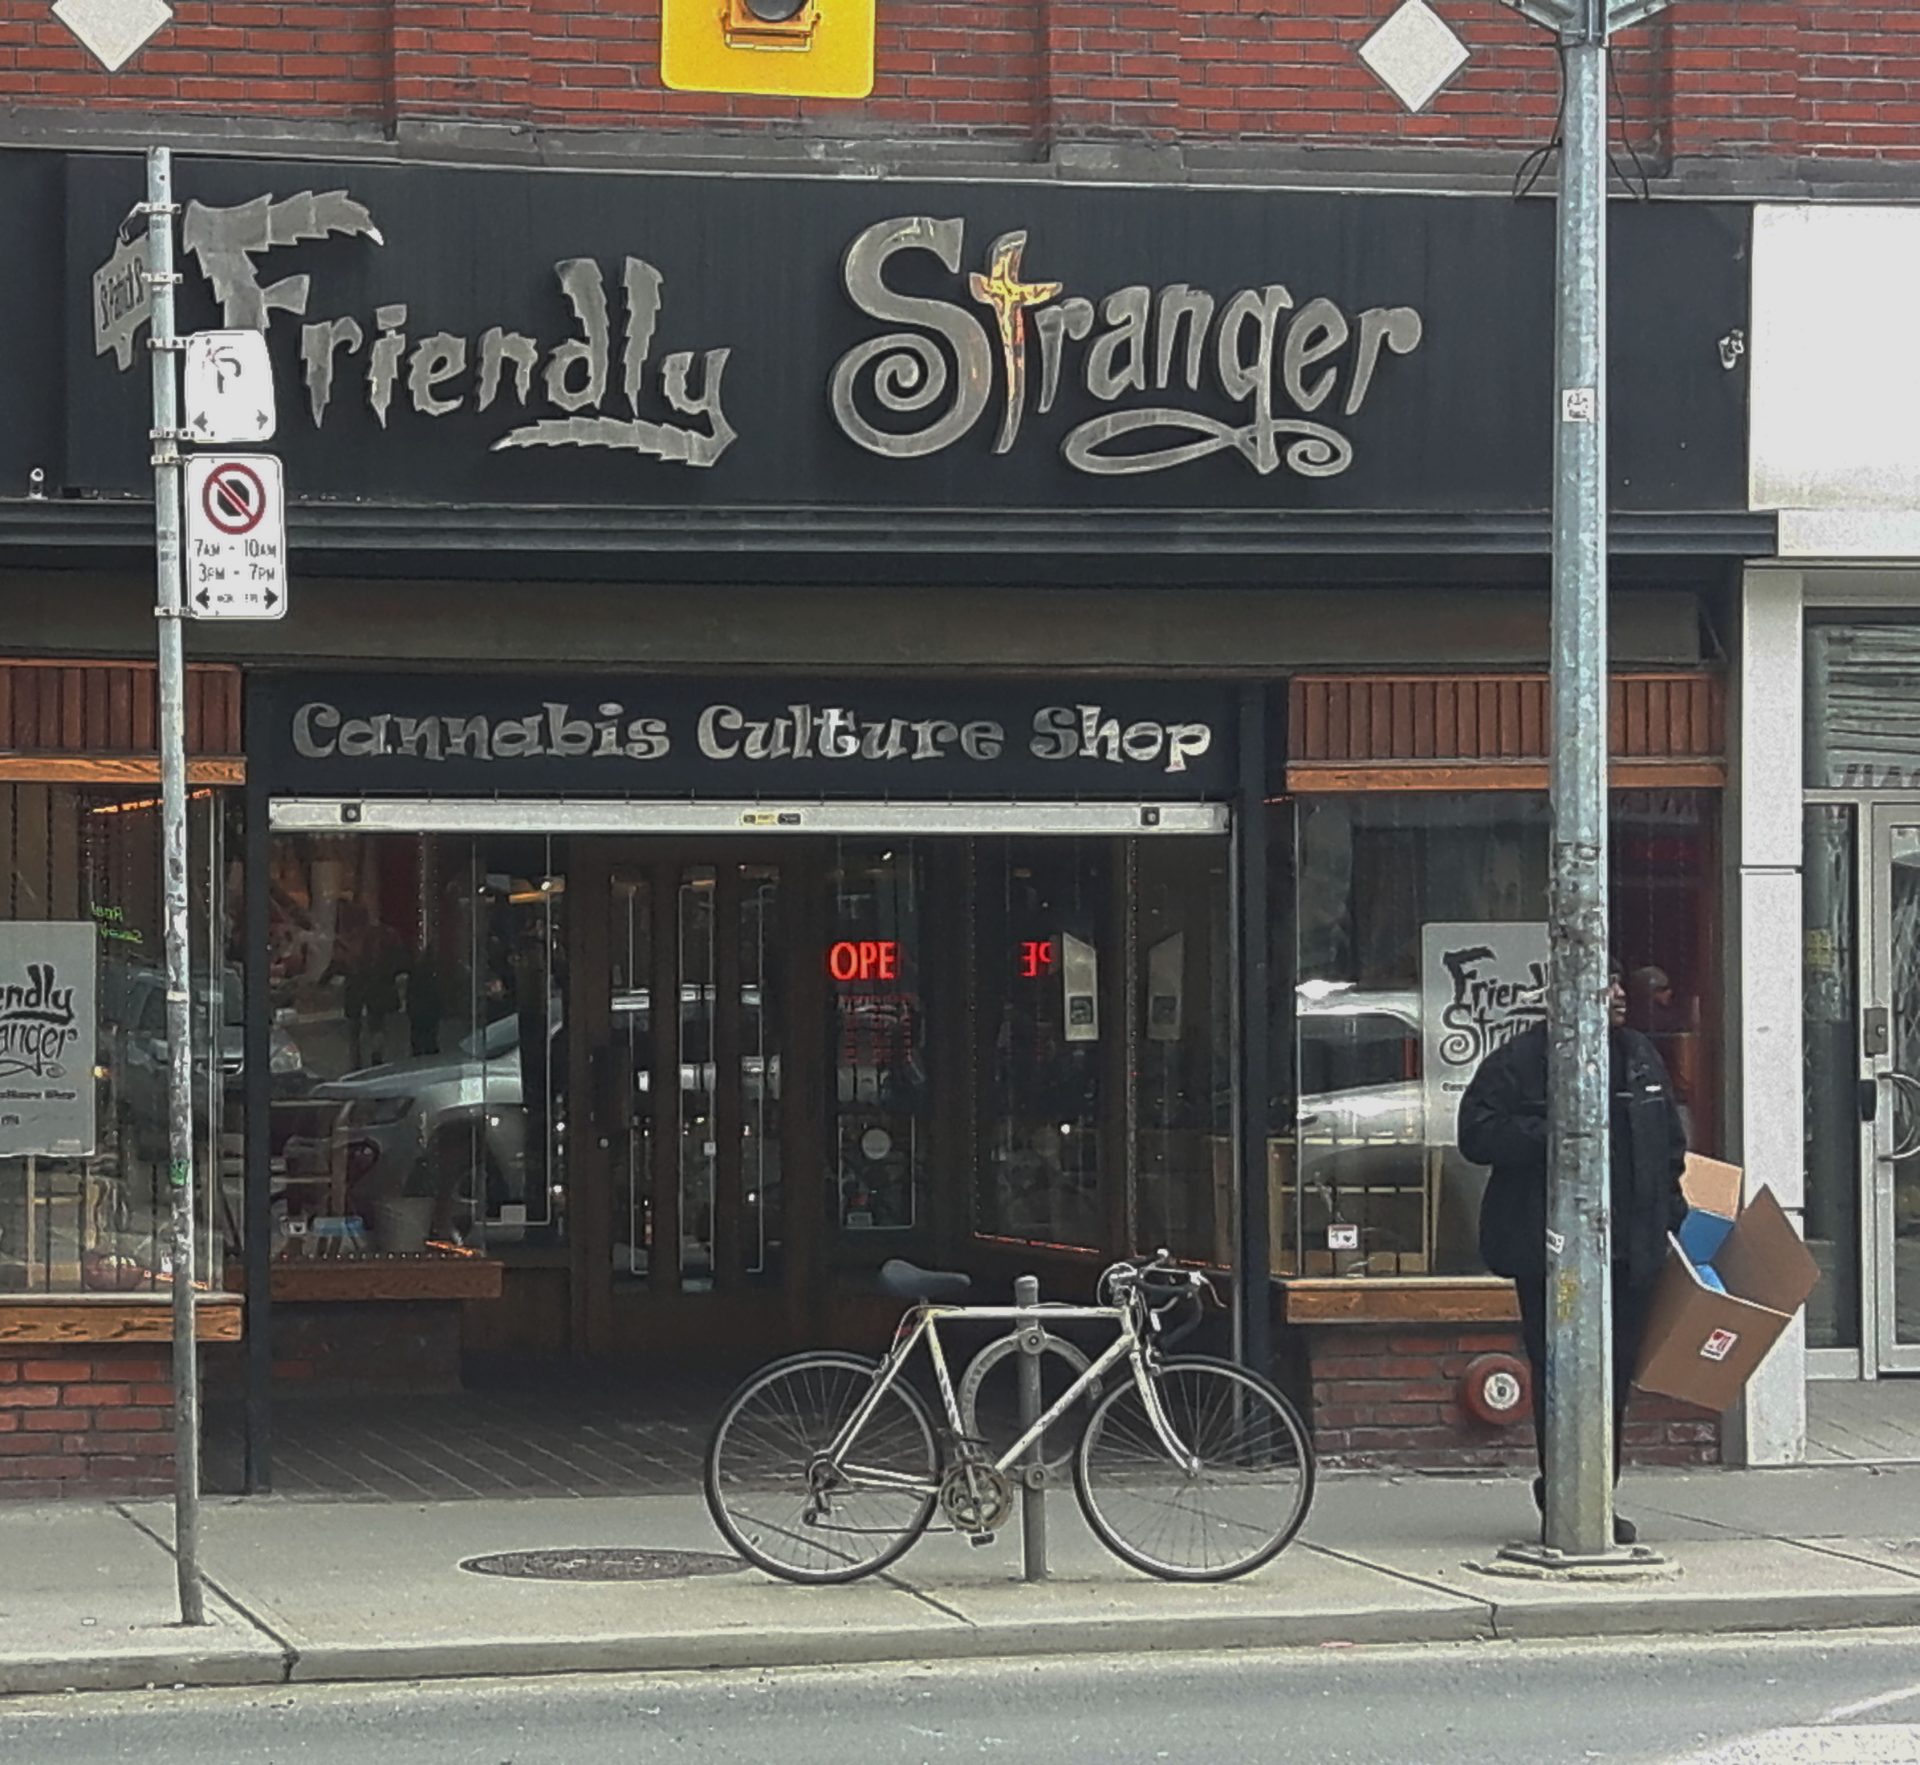 The Friendly Stranger Cannabis Culture Shop has profited greatlyu ever since the Hunny Pot opened across the street on April 1,2019